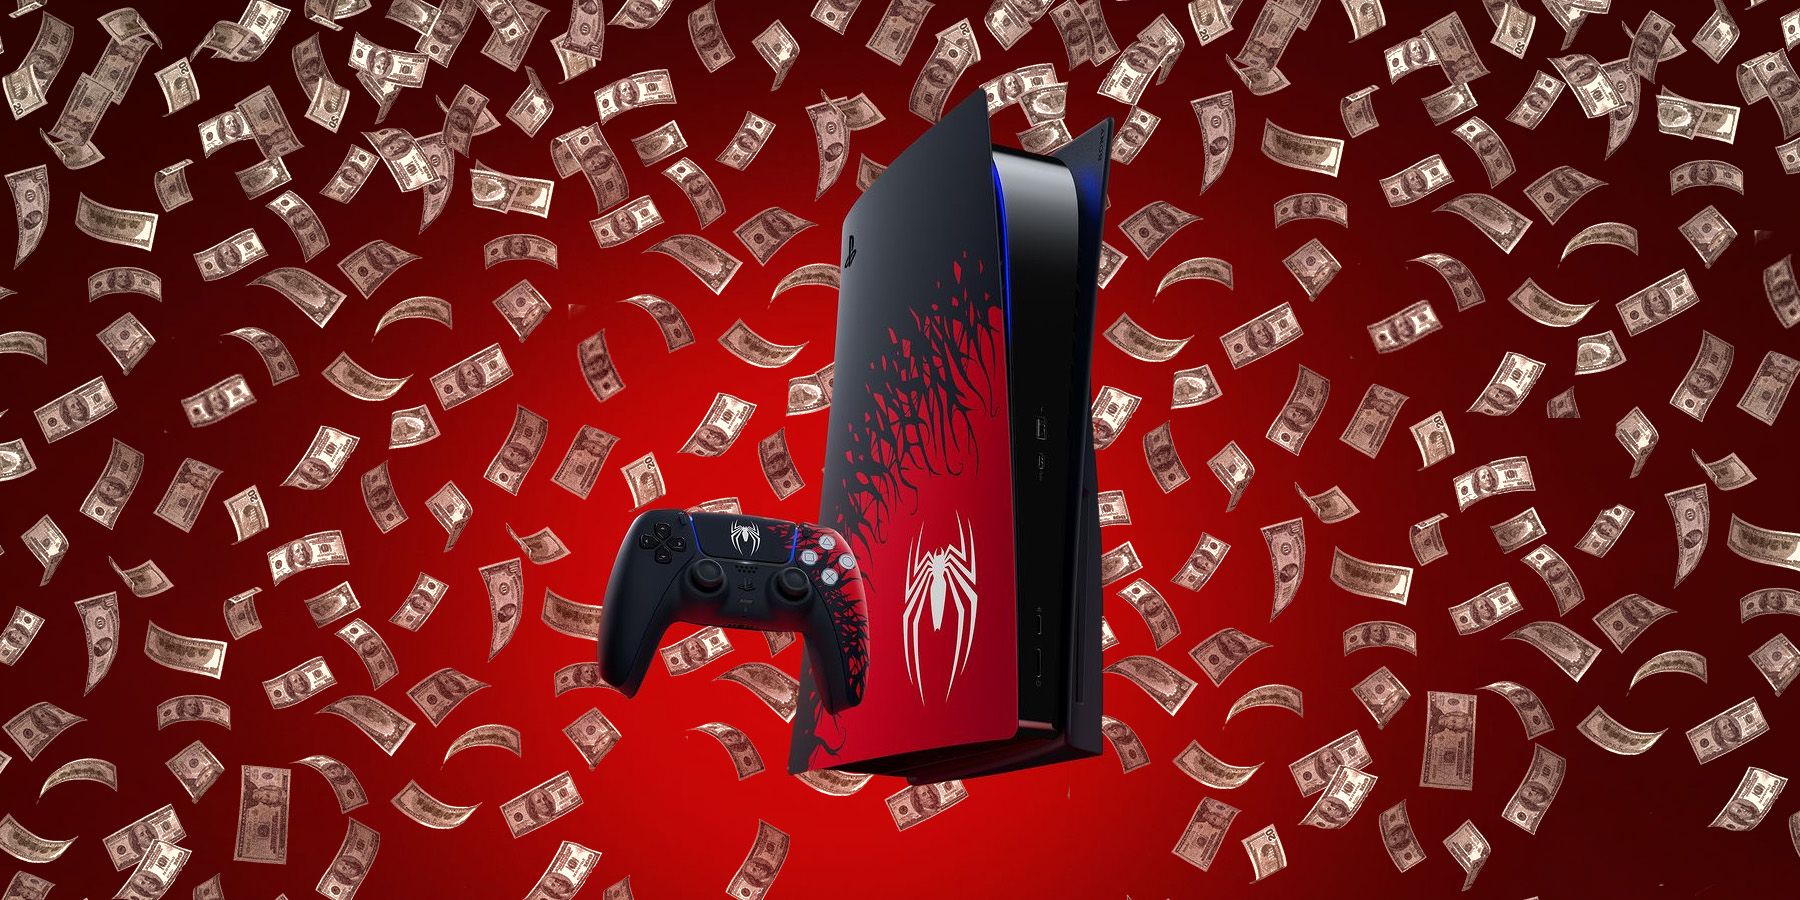 spider-man-2-ps5-consoles-sell-out-almost-immediately-2.jpg